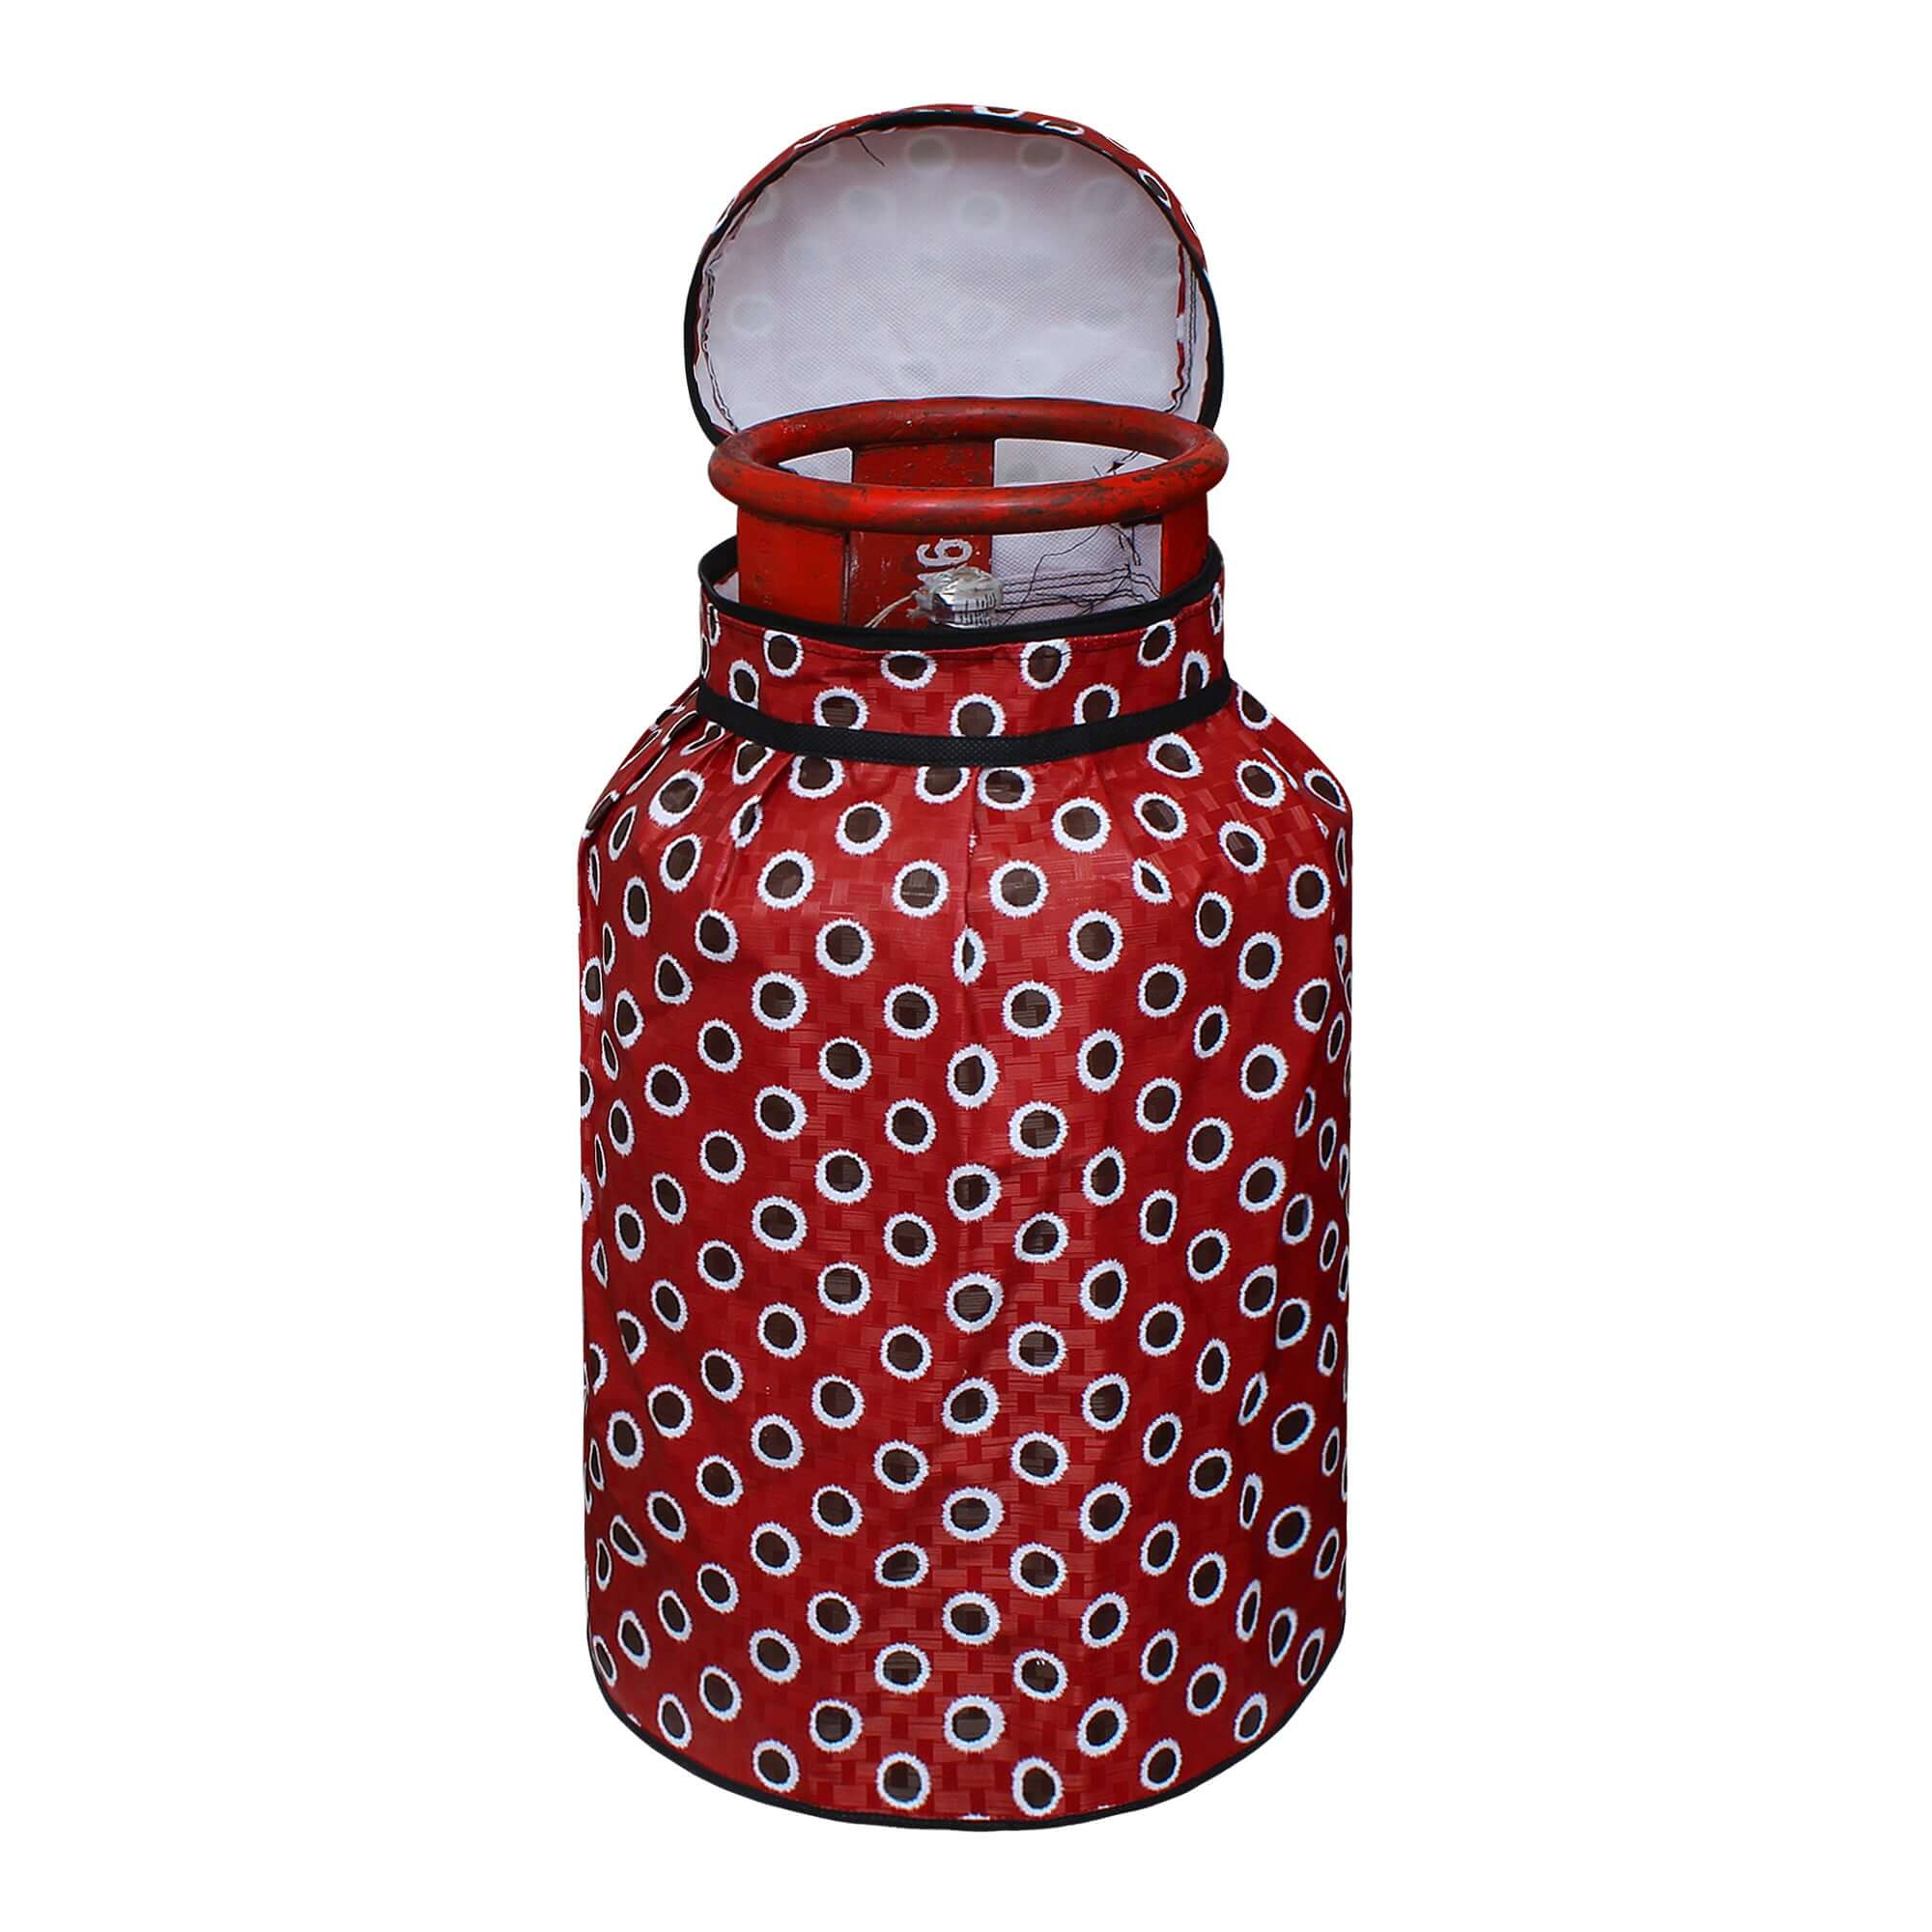 LPG Gas Cylinder Cover, SA11 - Dream Care Furnishings Private Limited